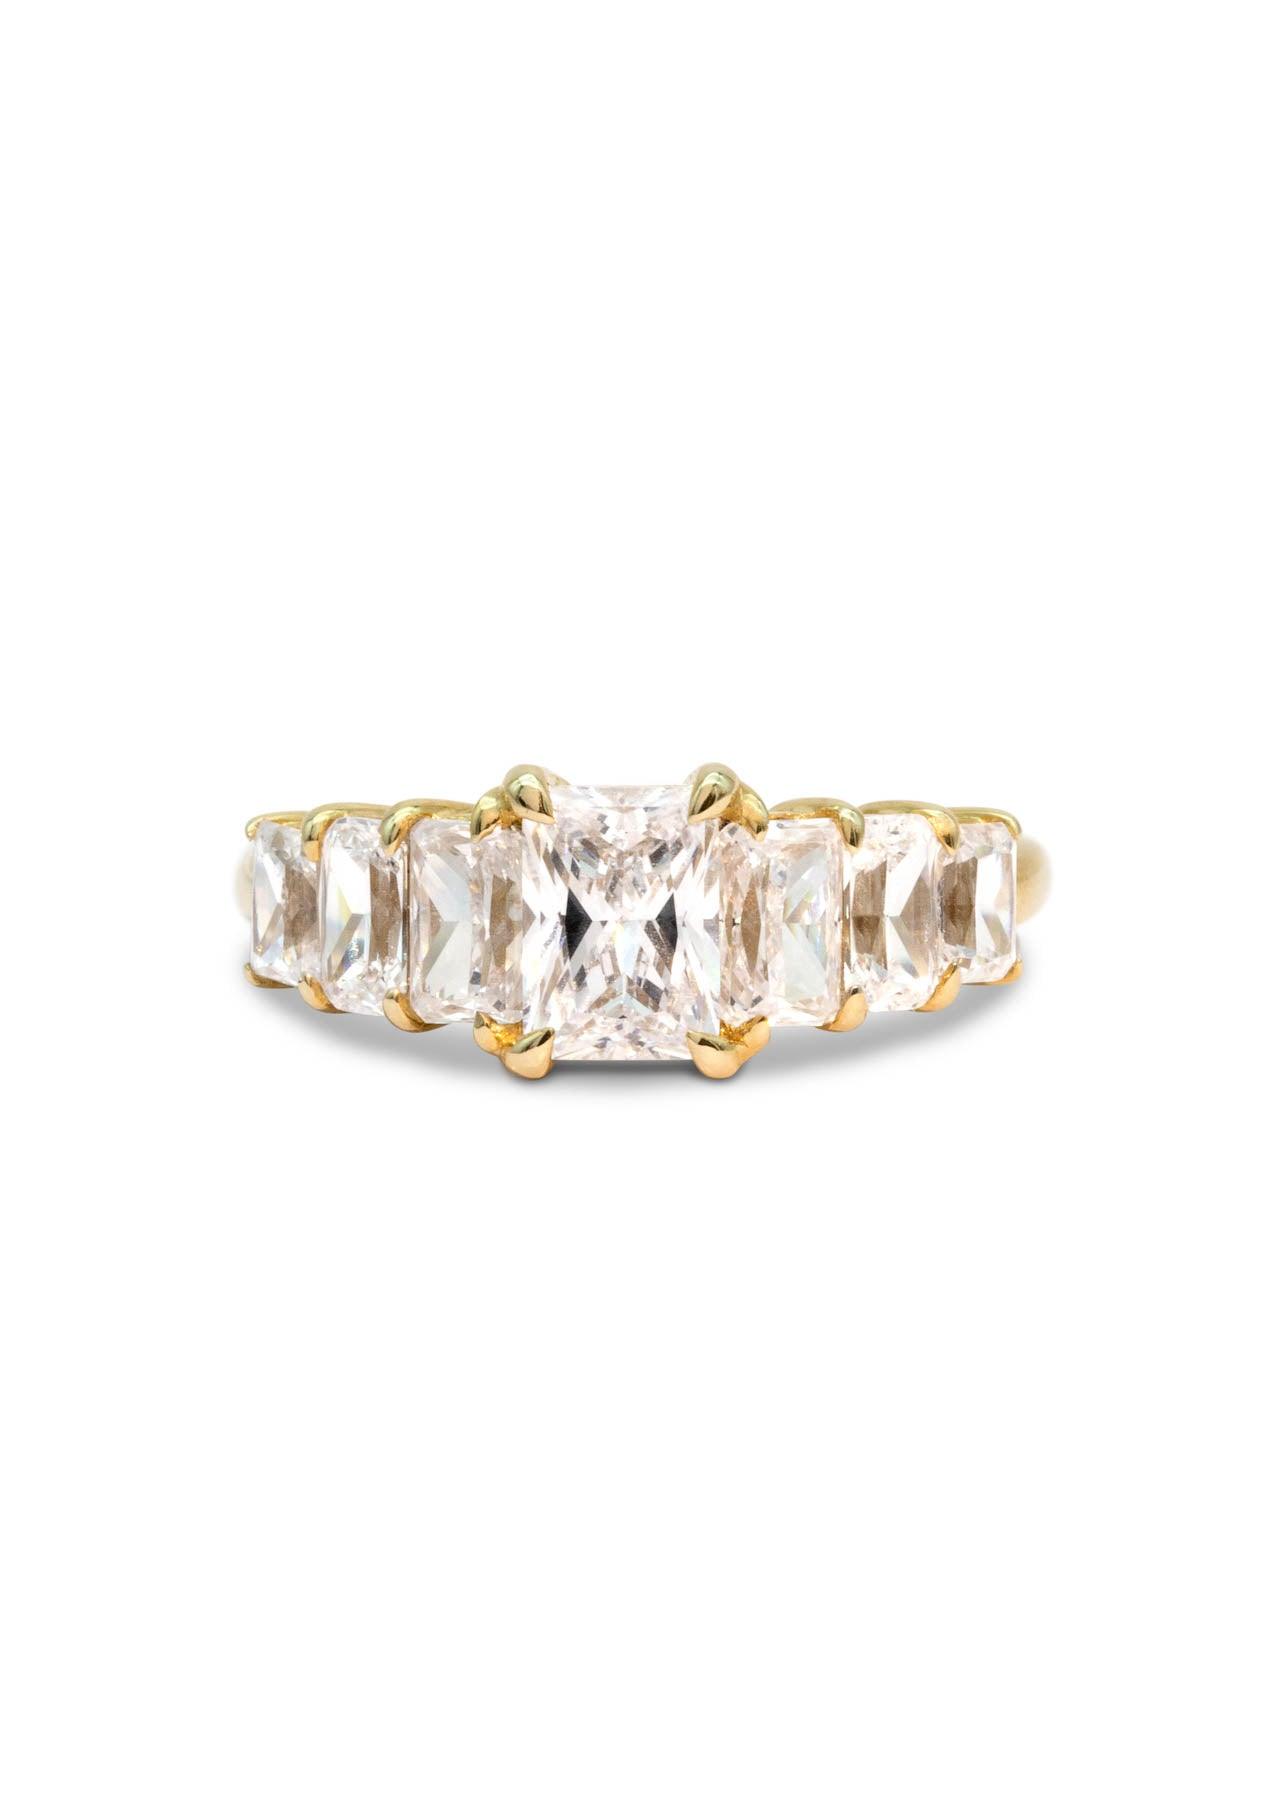 The Radiant Banks Yellow Gold Cultured Diamond Ring